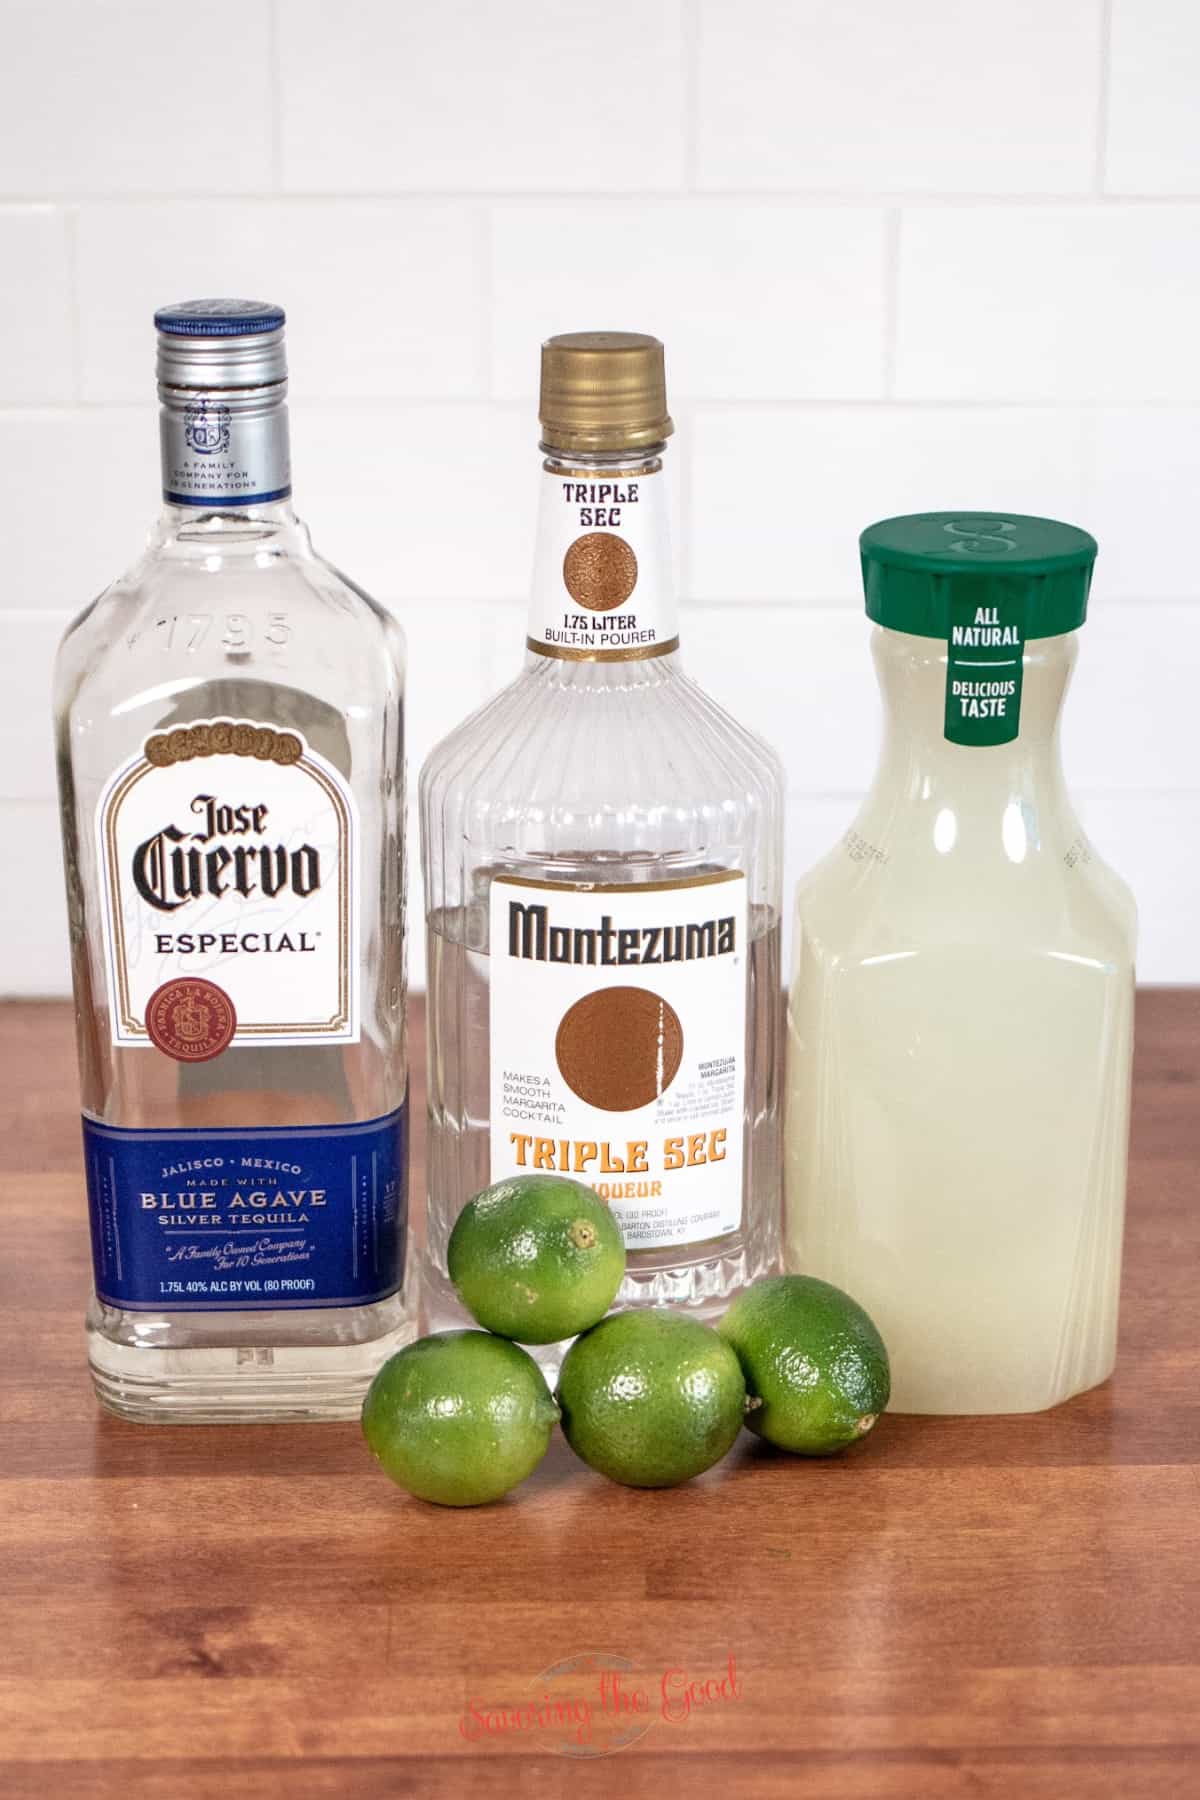 ingredients for to go margaritas, tequila, triple sec limeade, limes.